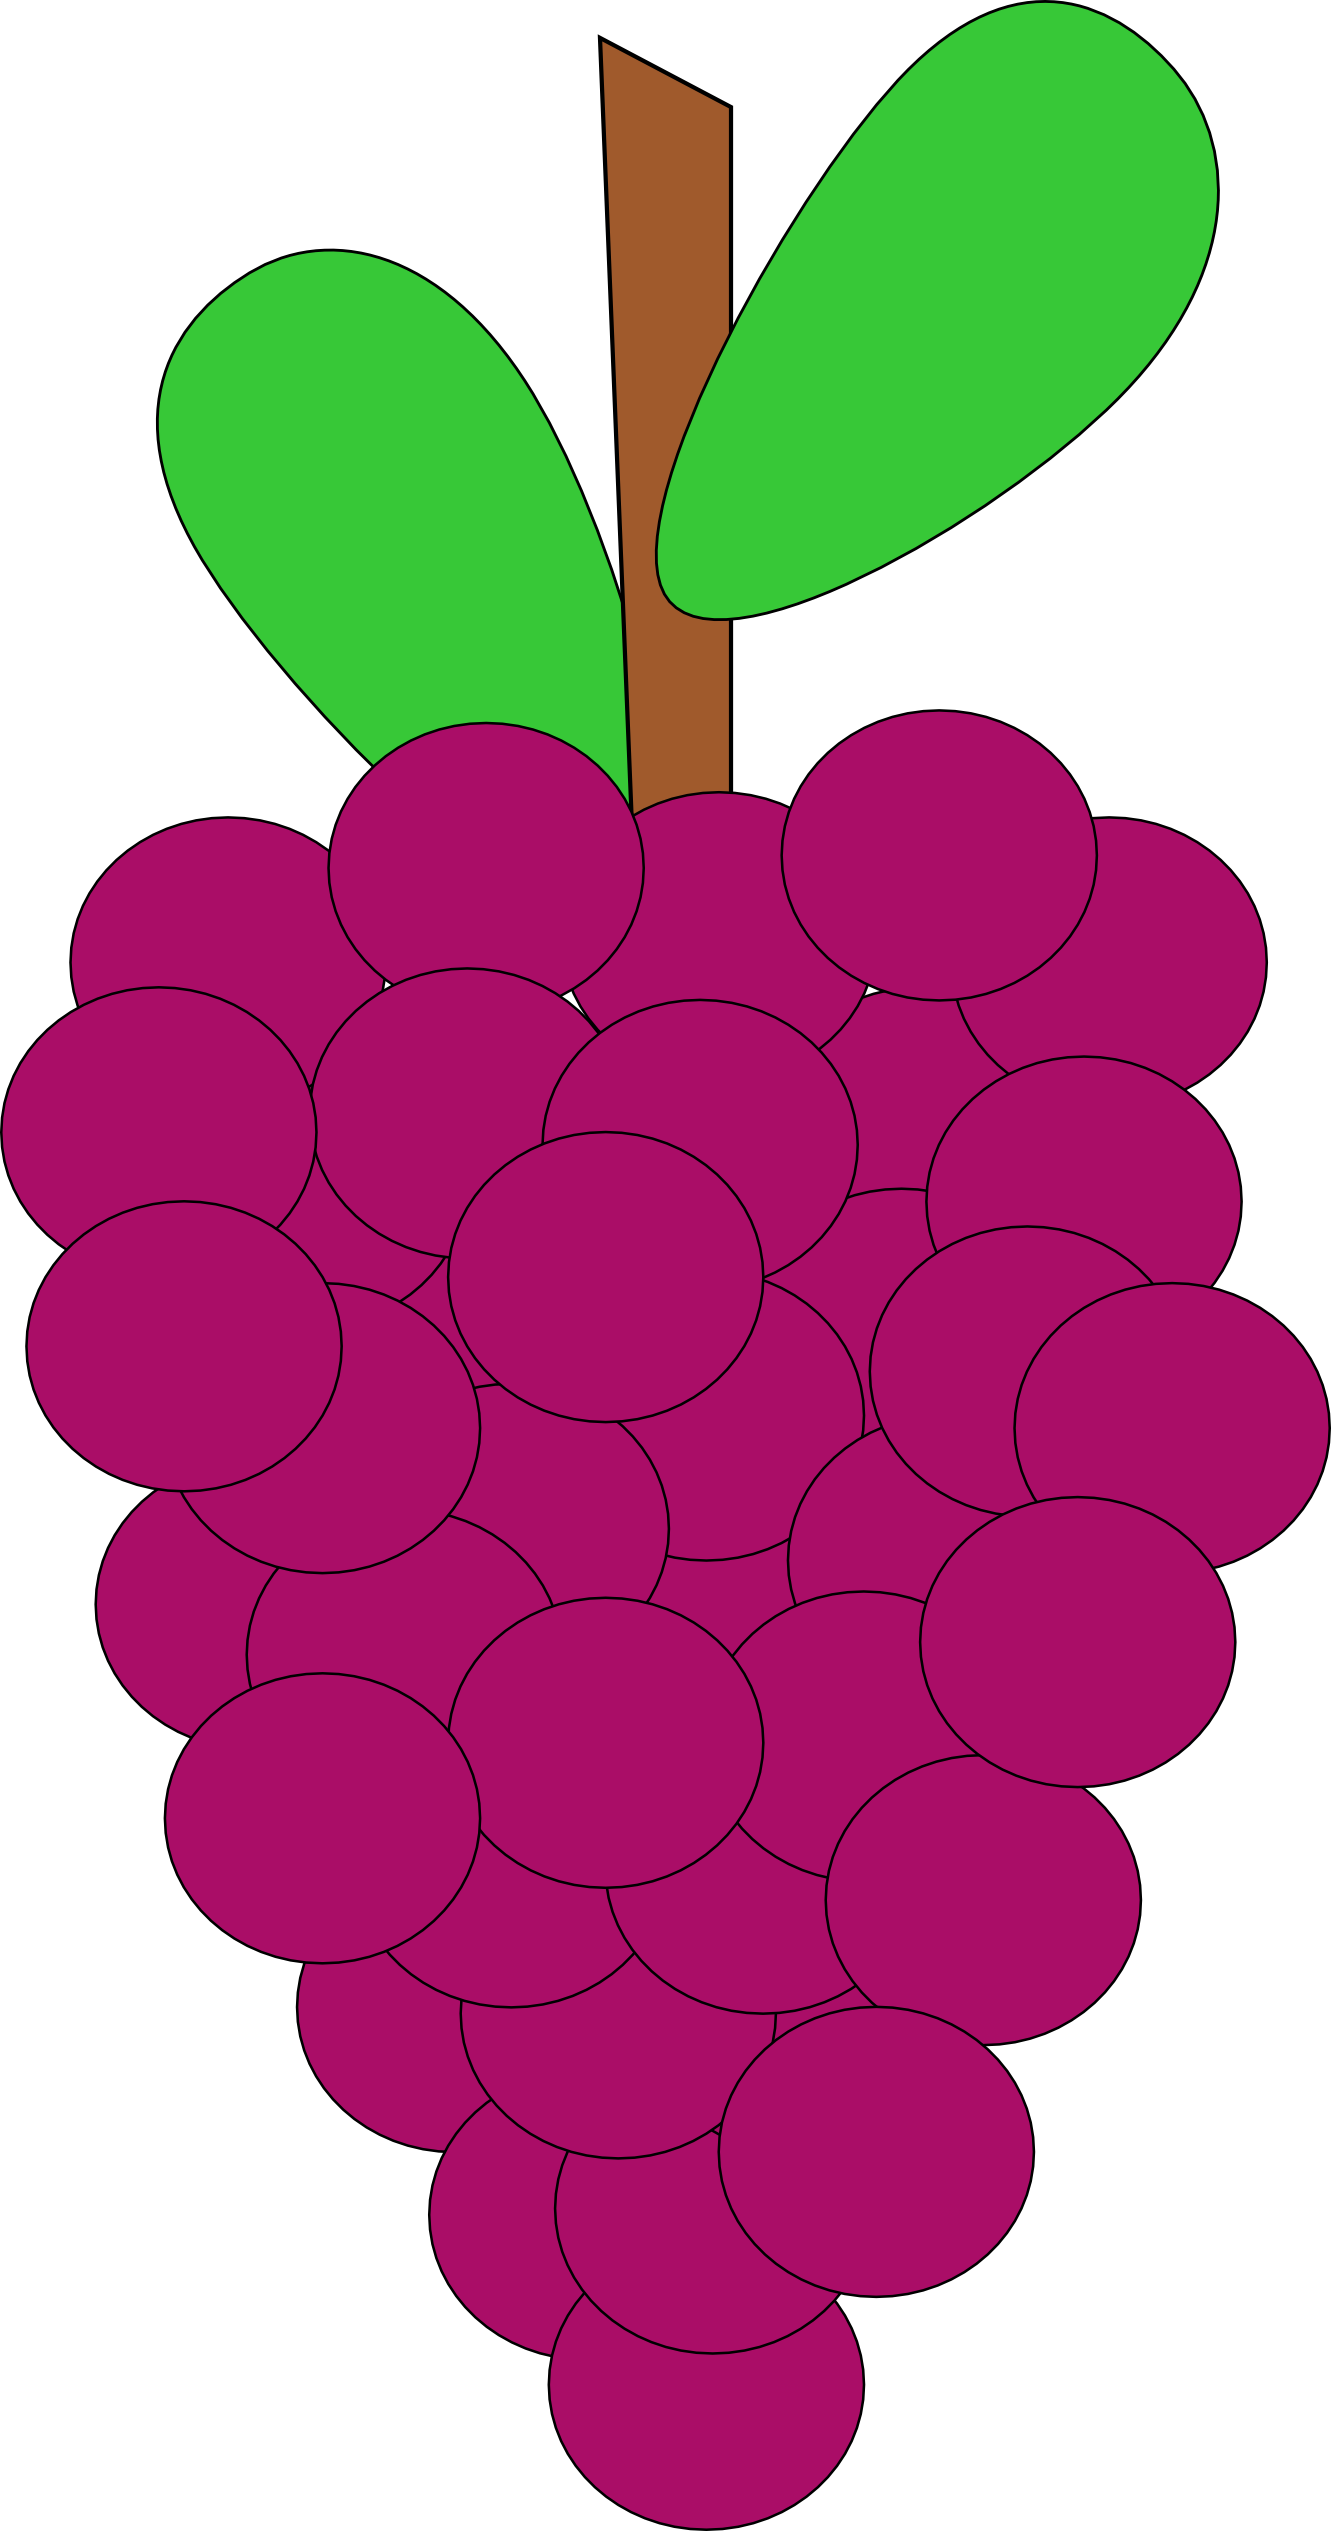 Grapes Grape Fruit Downloadclipart Org Free Download Clipart